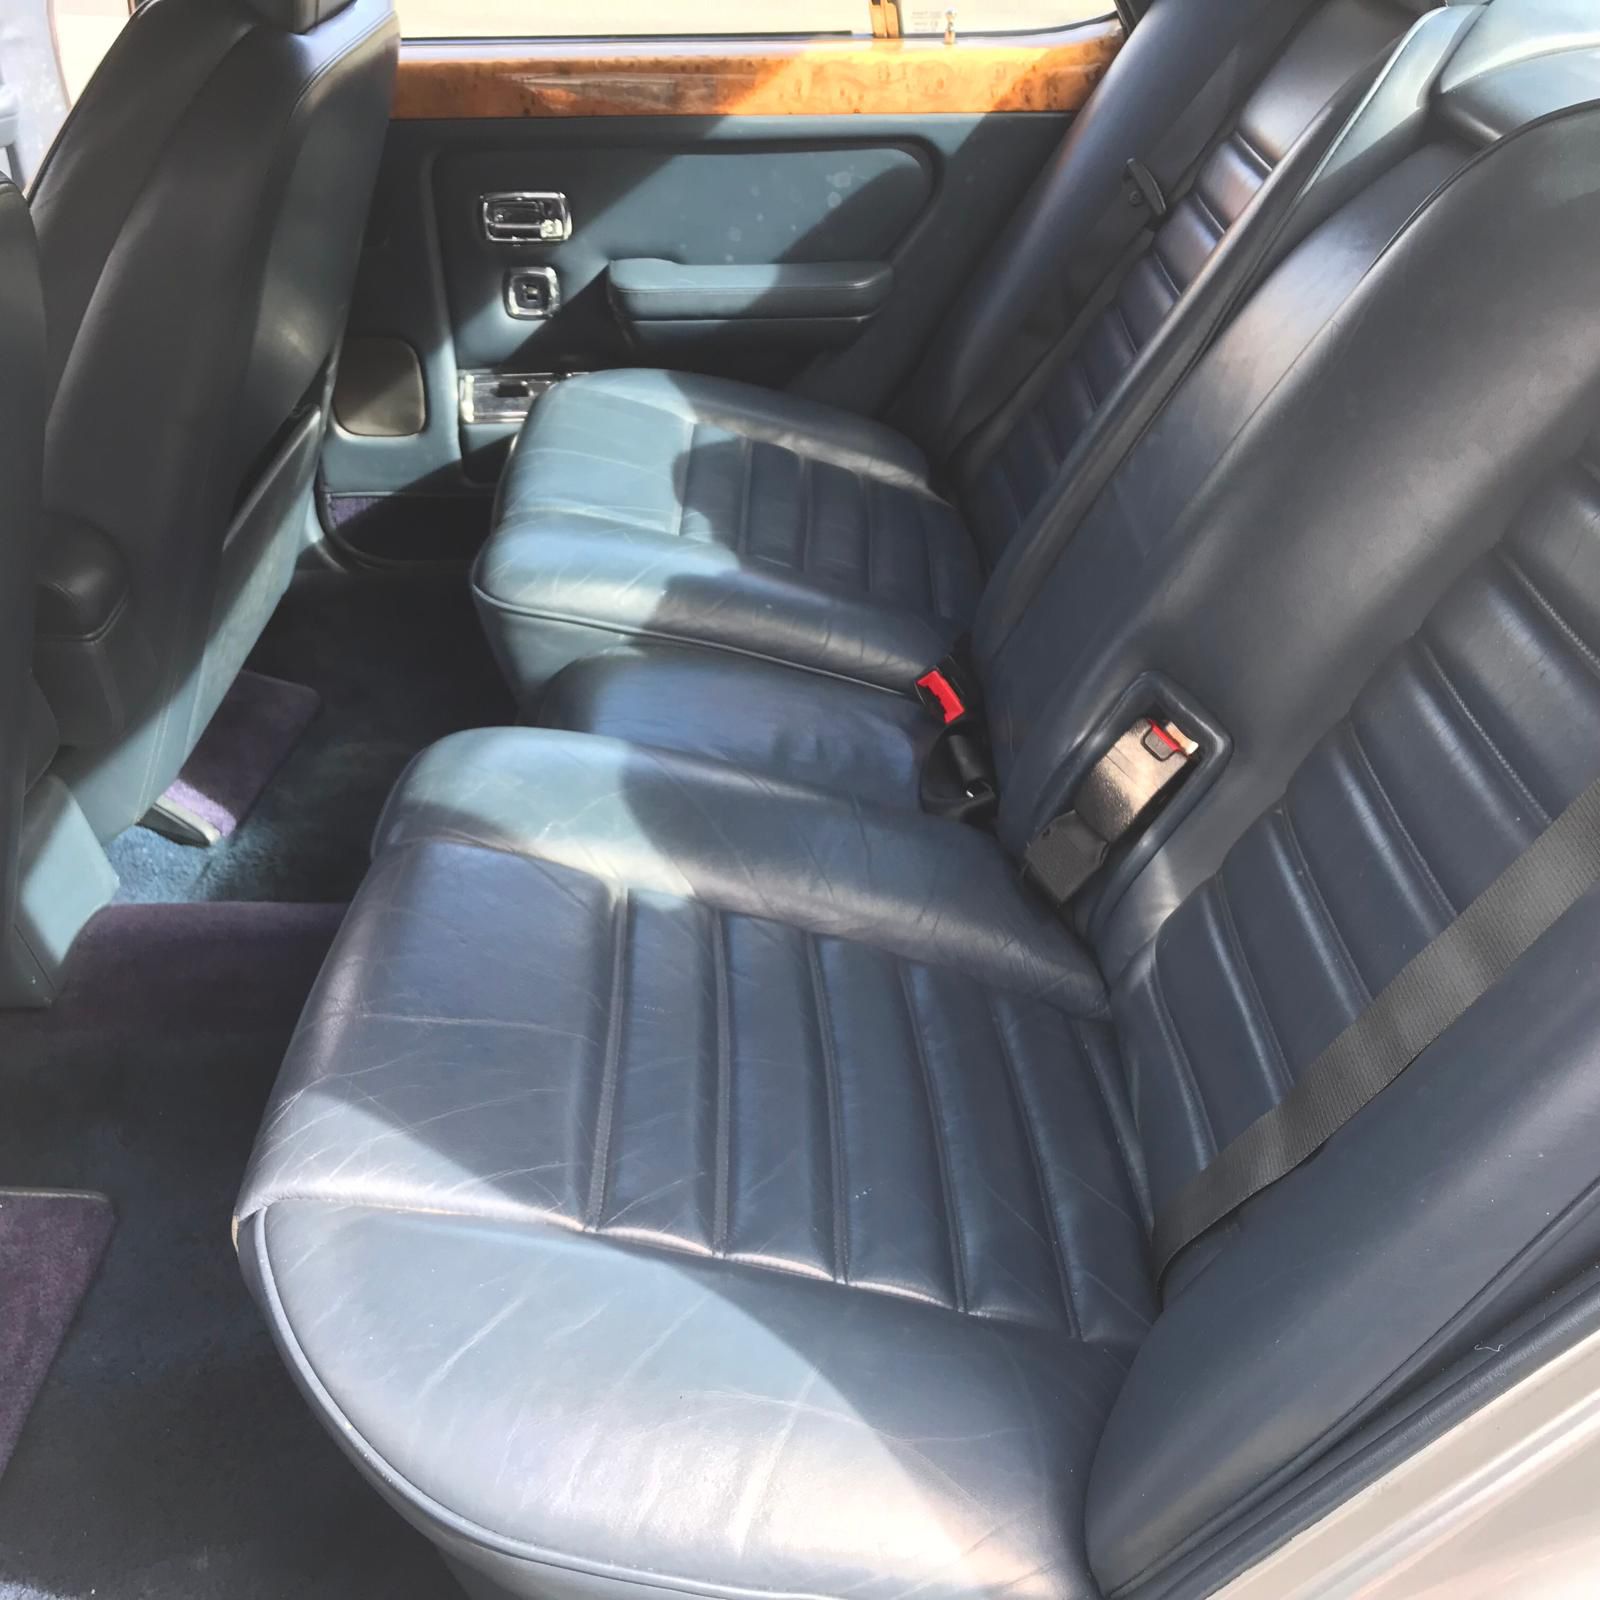 1990 Bentley Mulsanne S - Entry level motoring at a low estimate - Image 14 of 22